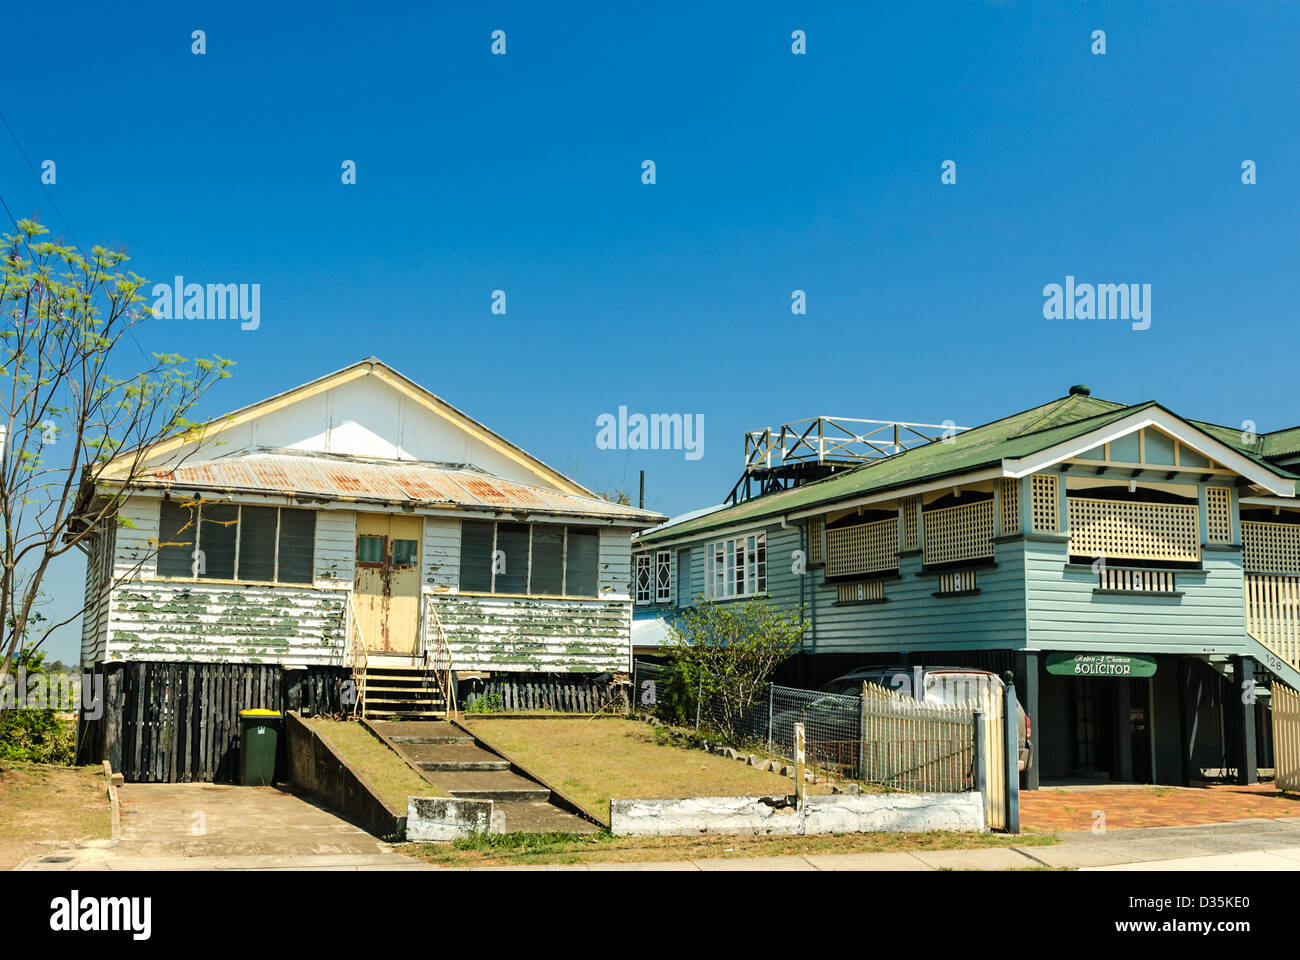 Wooden houses, typical of Queensland, Australia Stock Photo Alamy